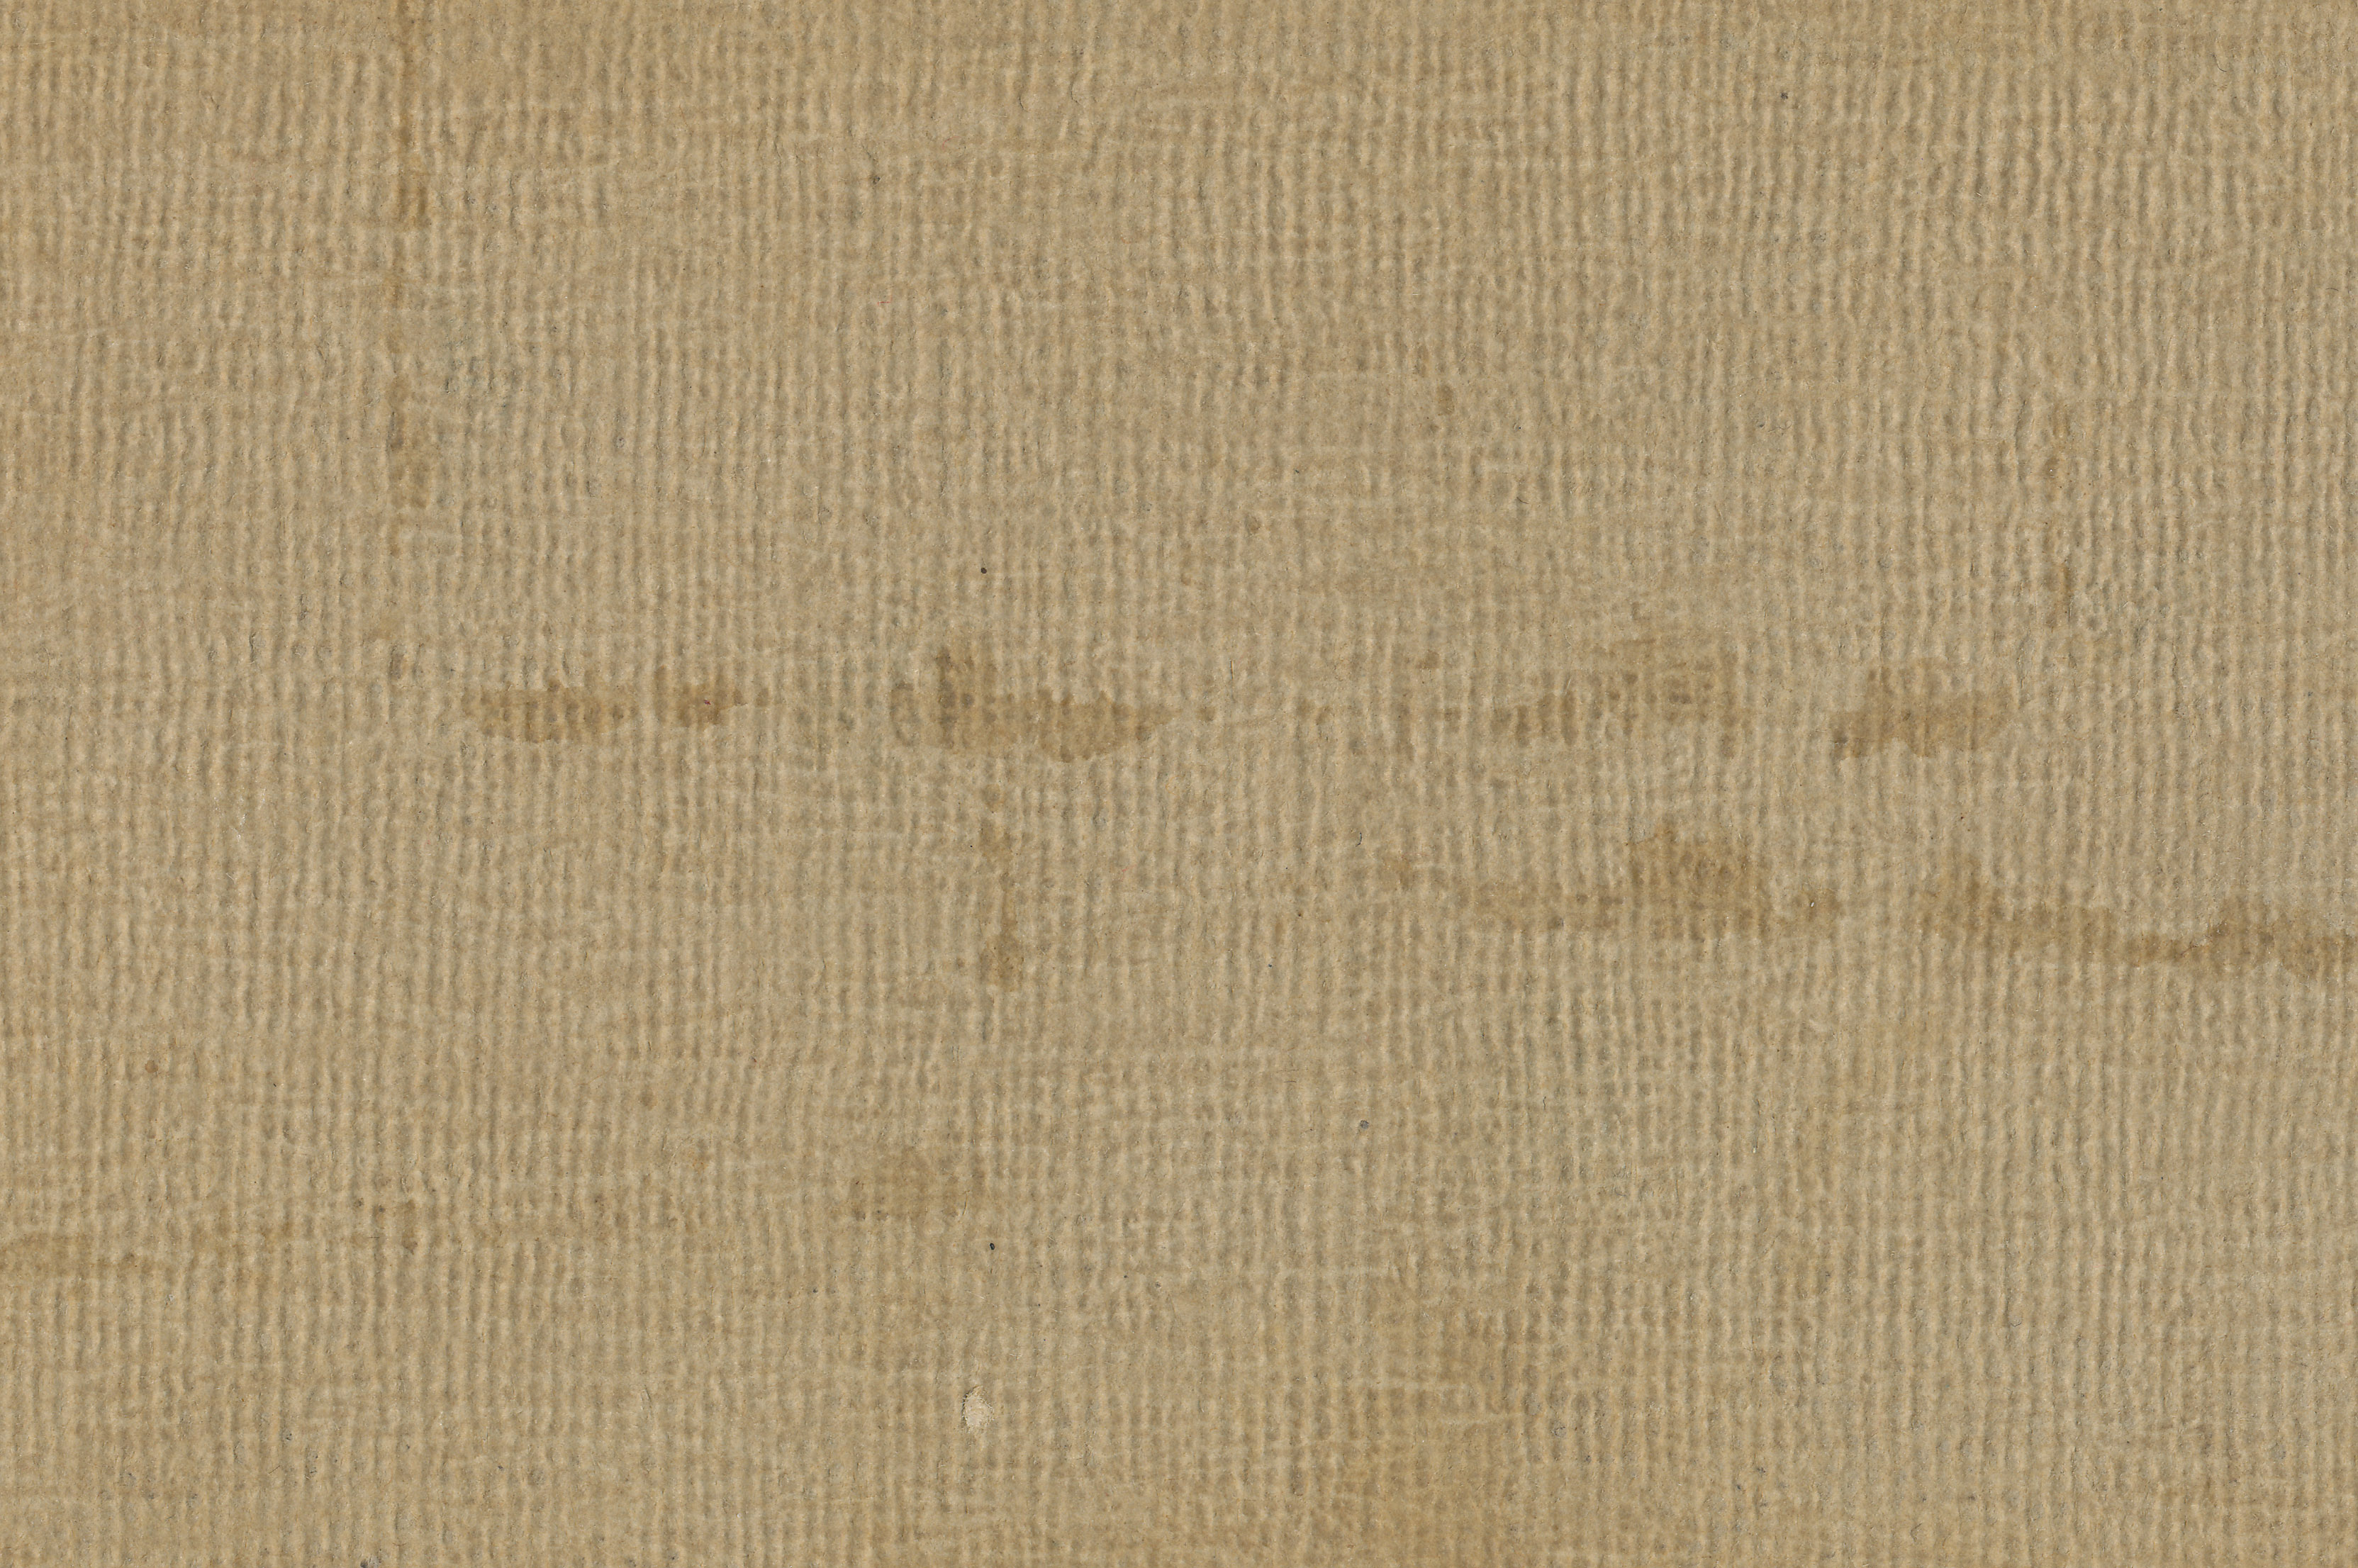 Paper texture, with brownish spots | Textures for photoshop free